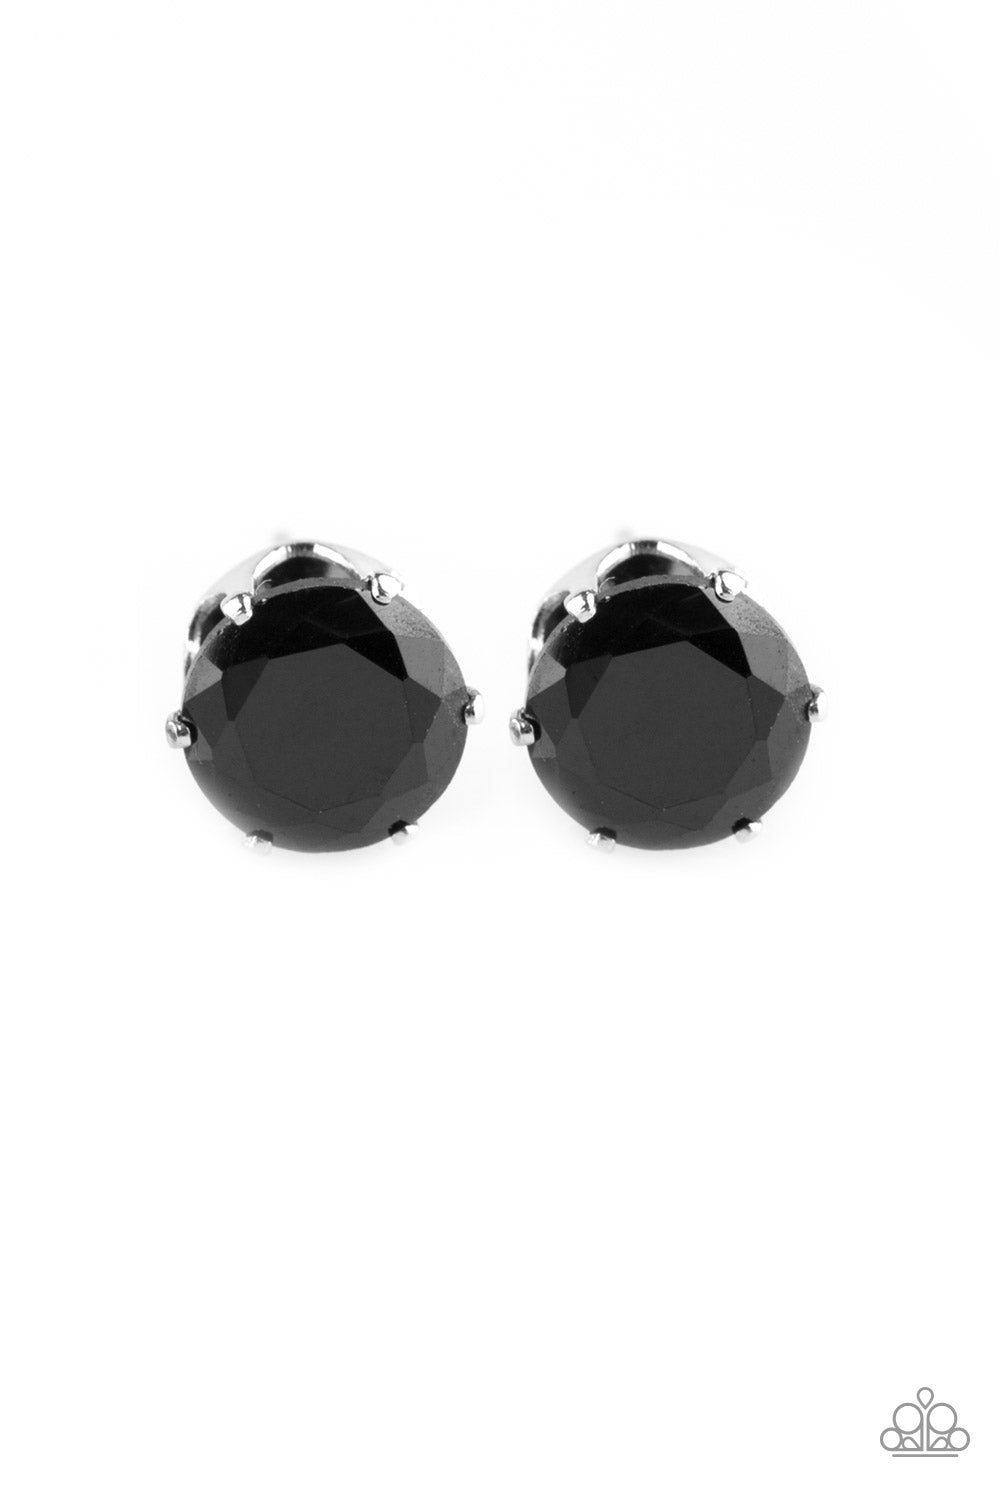 Paparazzi Accessories Come Out On Top - Black Earrings 